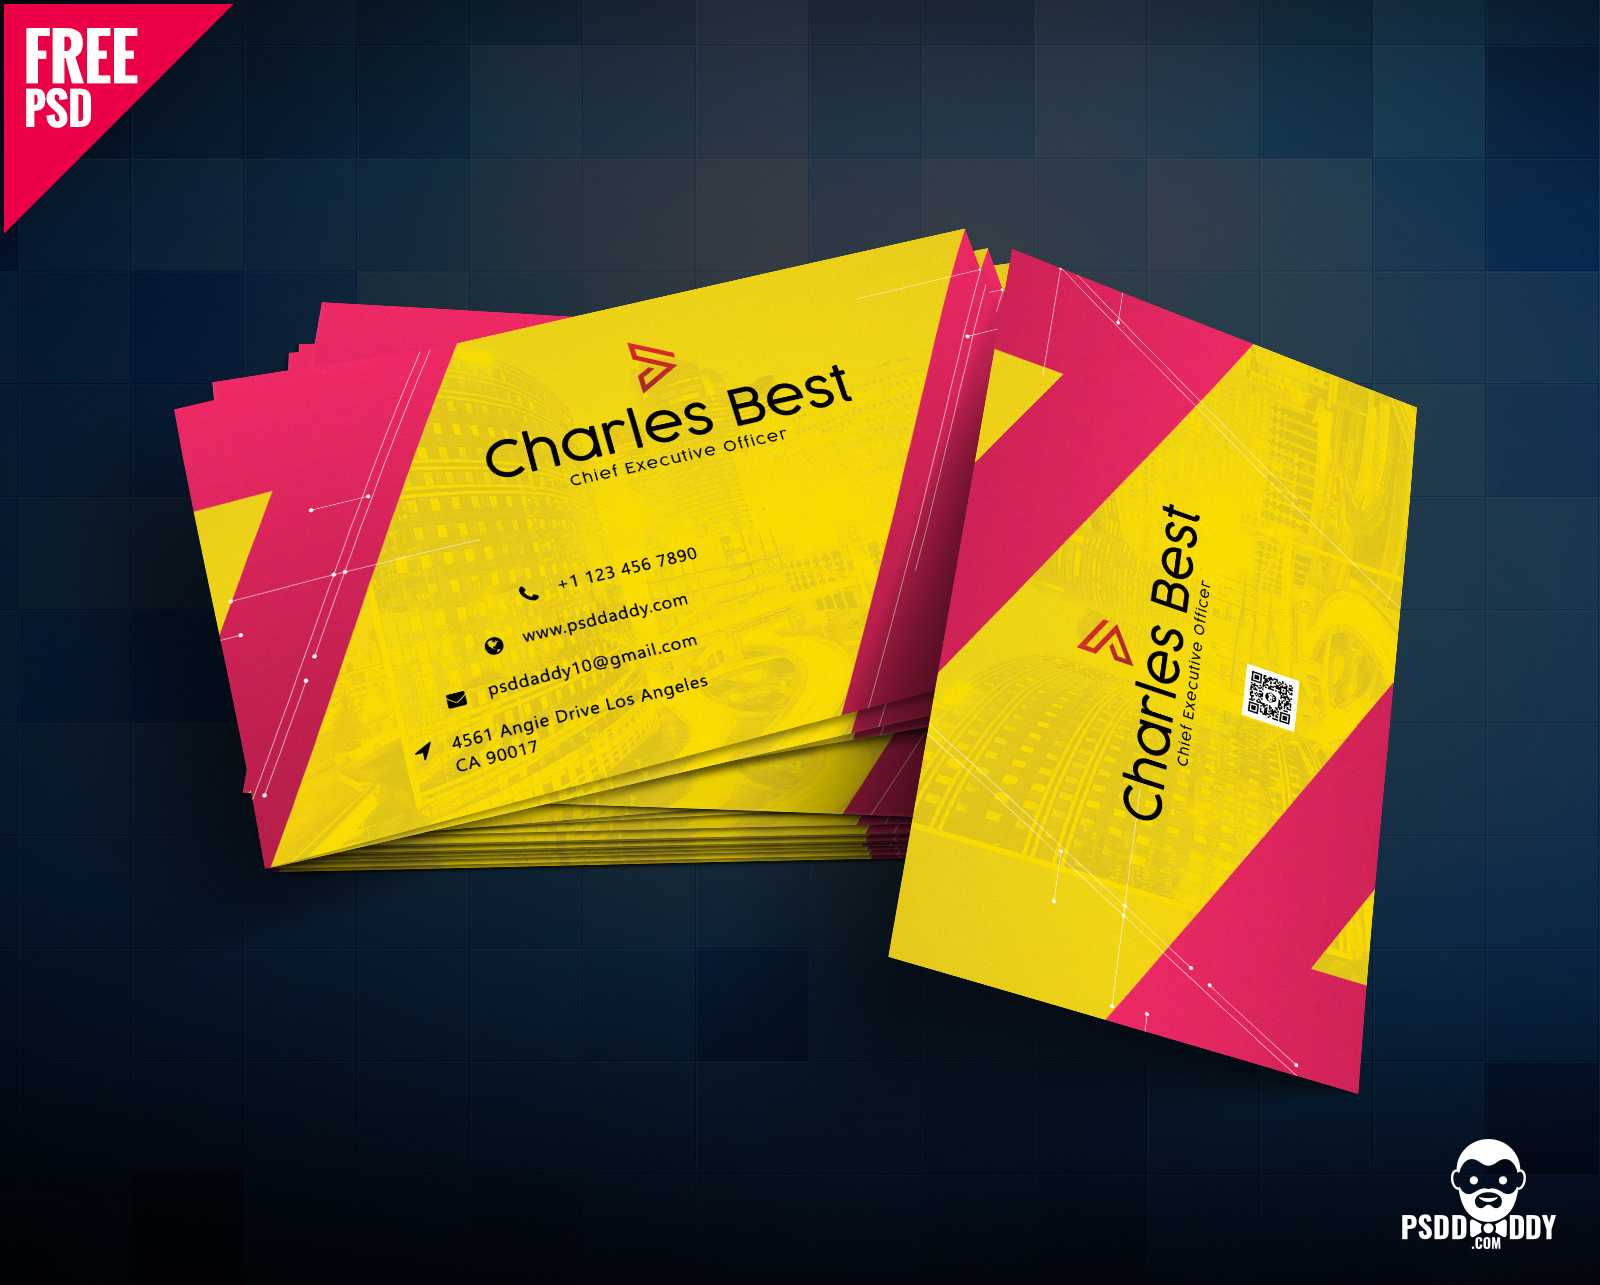 Download] Creative Business Card Free Psd | Psddaddy Within Download Visiting Card Templates